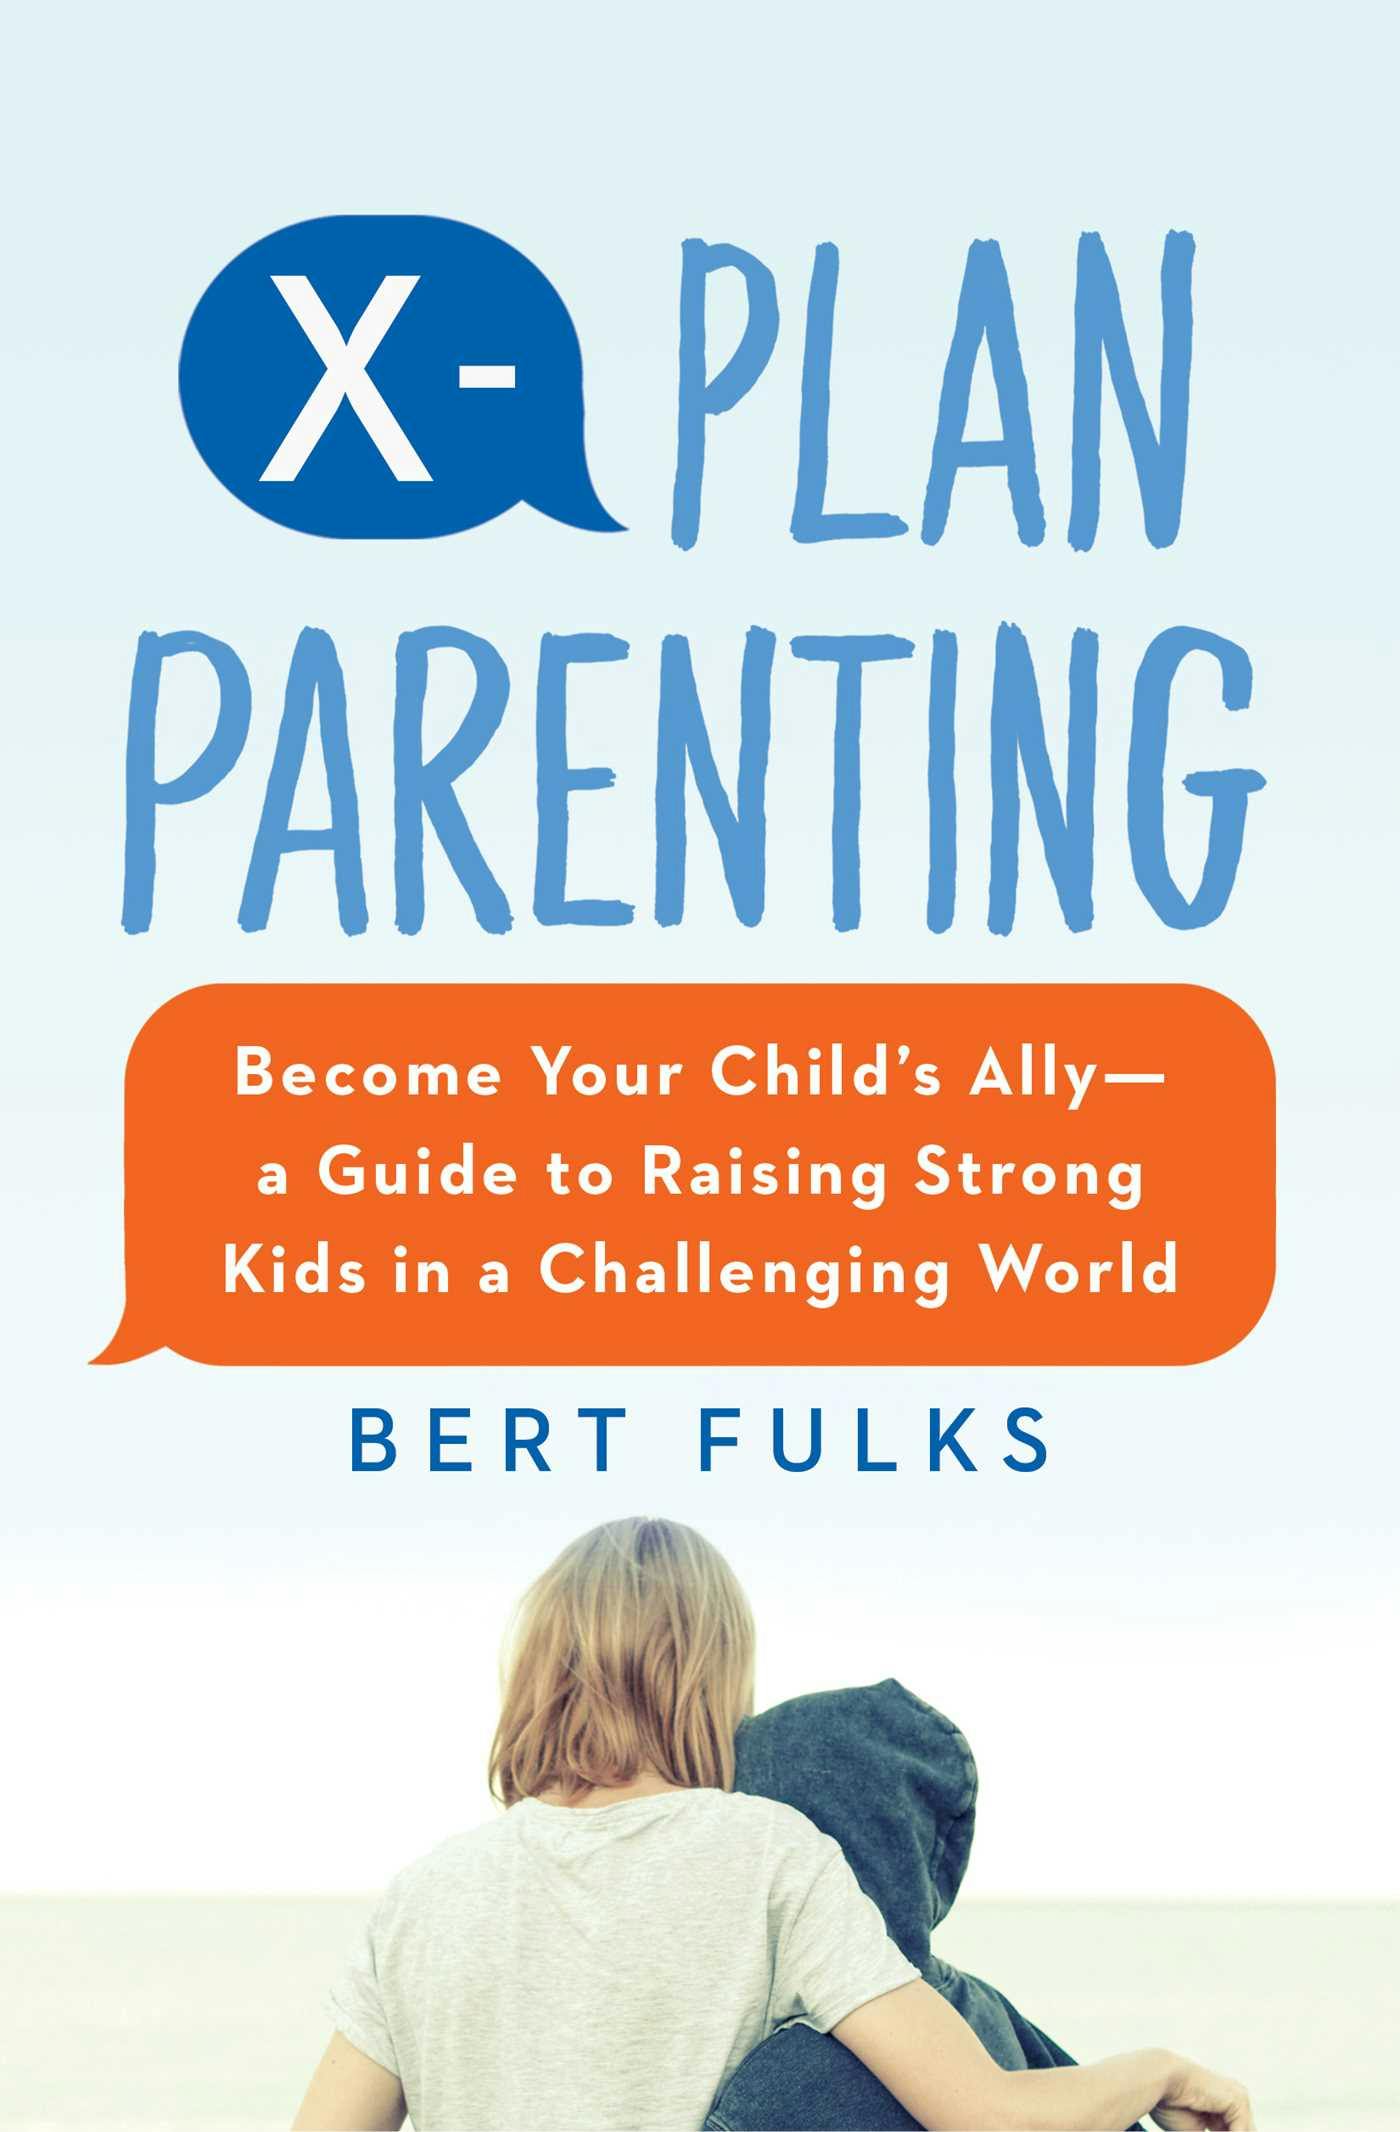 X-Plan Parenting: Become Your Child's Ally—A Guide to Raising Strong Kids in a Challenging World - Bert Fulks